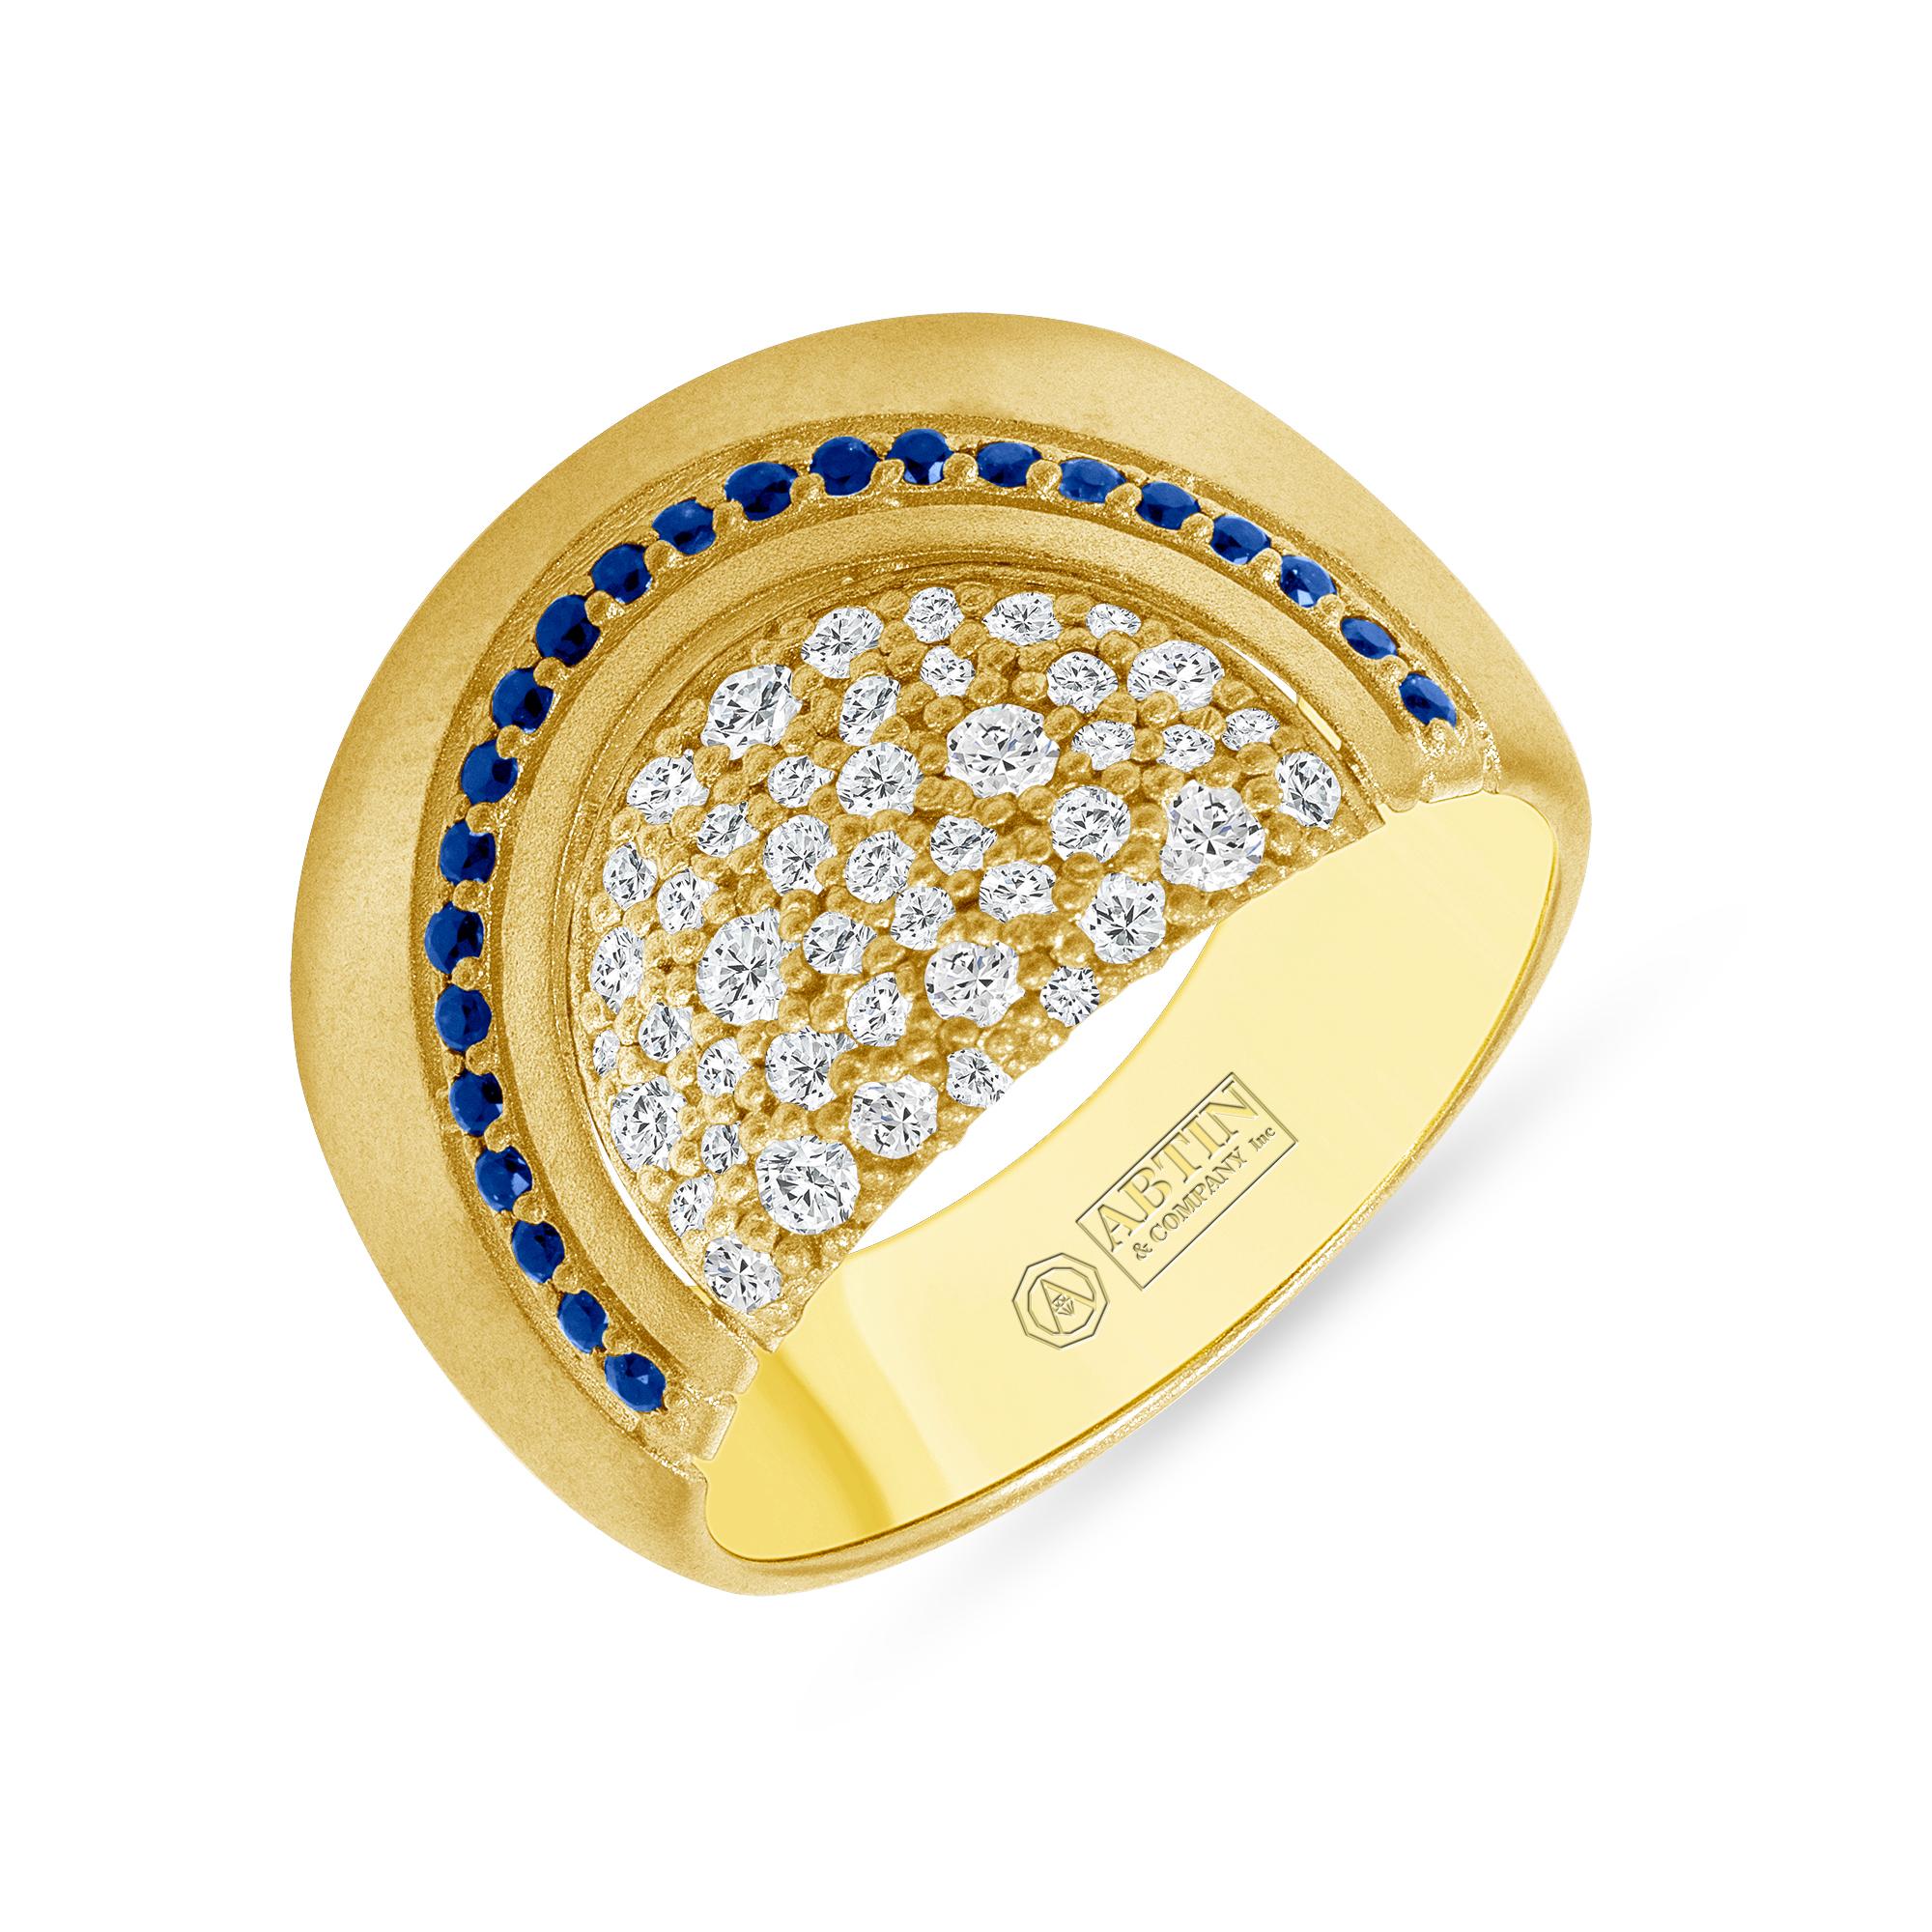 Crafted in 14K gold, this exquisite ring features a dazzling arrangement of 0.68 carats of diamonds and blue sapphire. Its high-domed design sparkles with round brilliant-cut diamonds and round-cut blue sapphire. The rich, satin blue of the blue